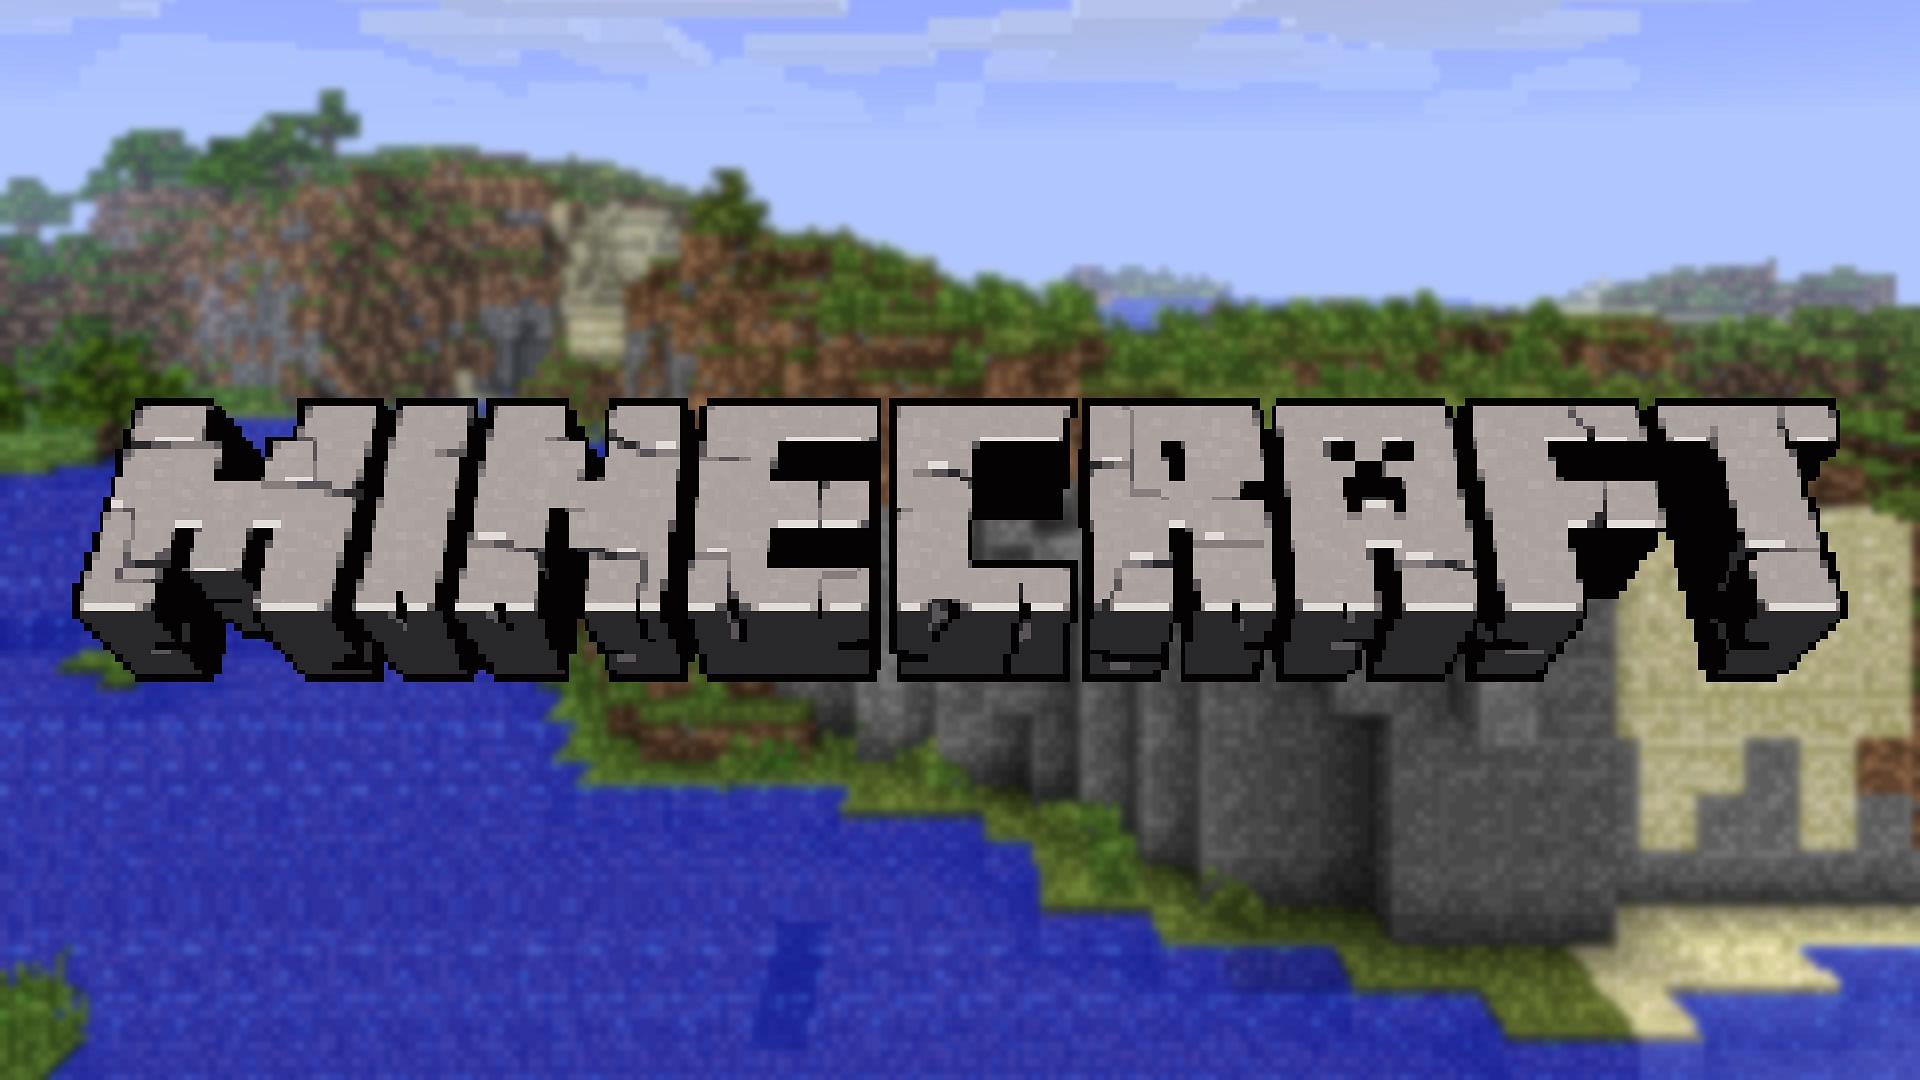 Release date confirmed for PS4 version of Minecraft